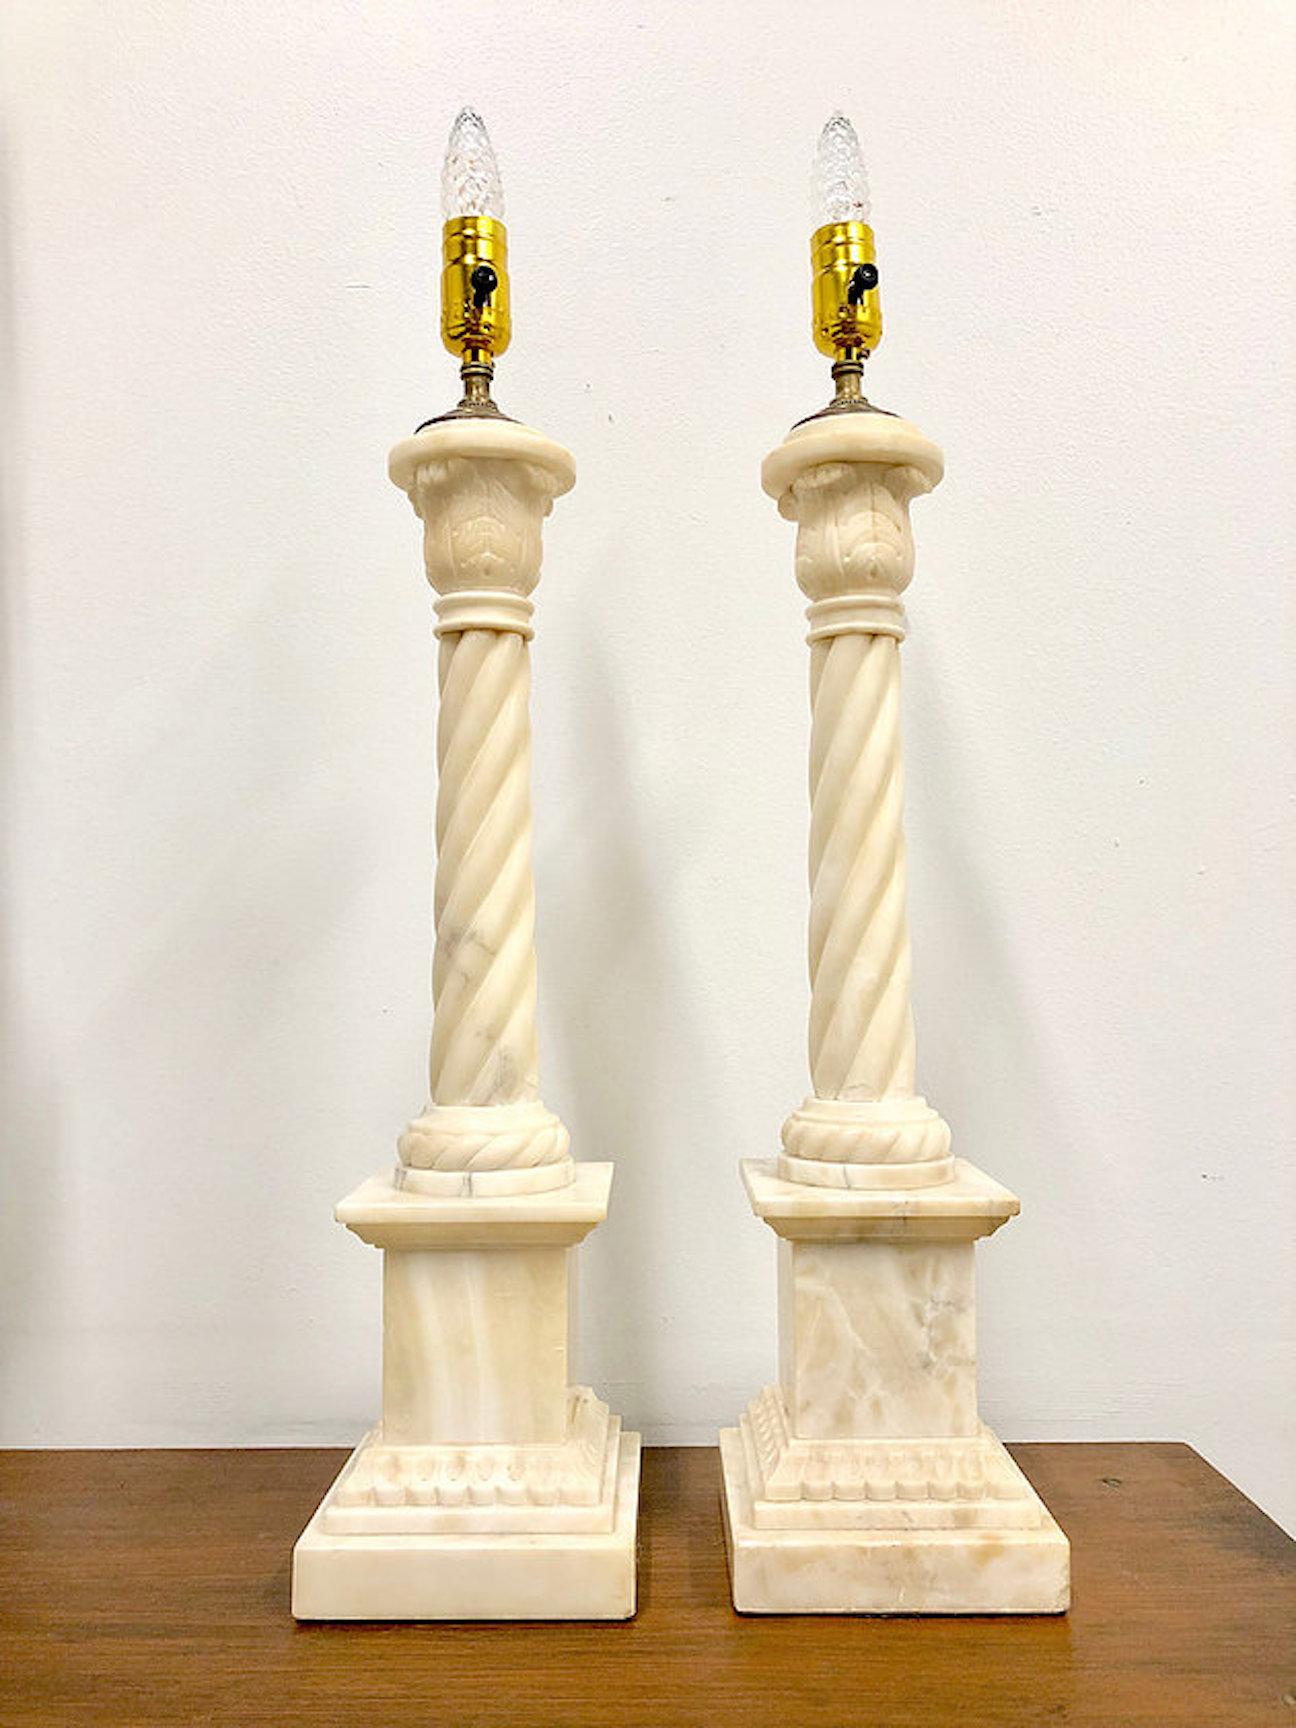 Pair of Alabaster column lamps. Lamps are in good vintage condition with visible chipping around column and base. There are no lamp shades for this listing.

Dimensions:
5 diameter x 24.5 (to socket).